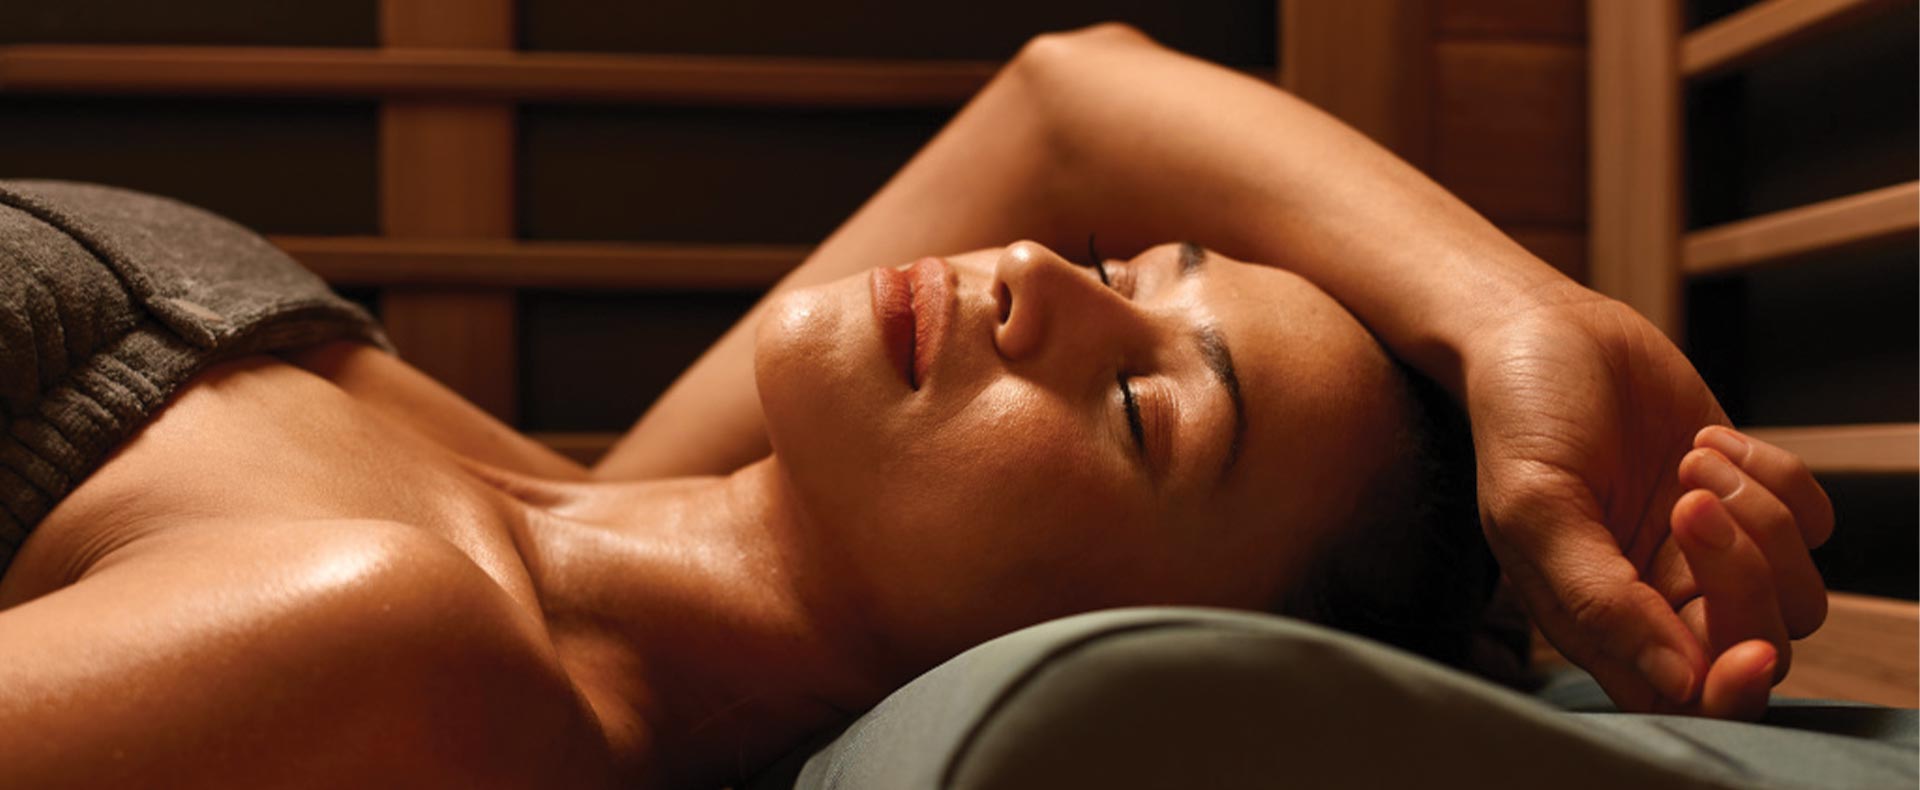 3 Reasons Why Infrared Saunas Do Not Need High Temperatures.jpg